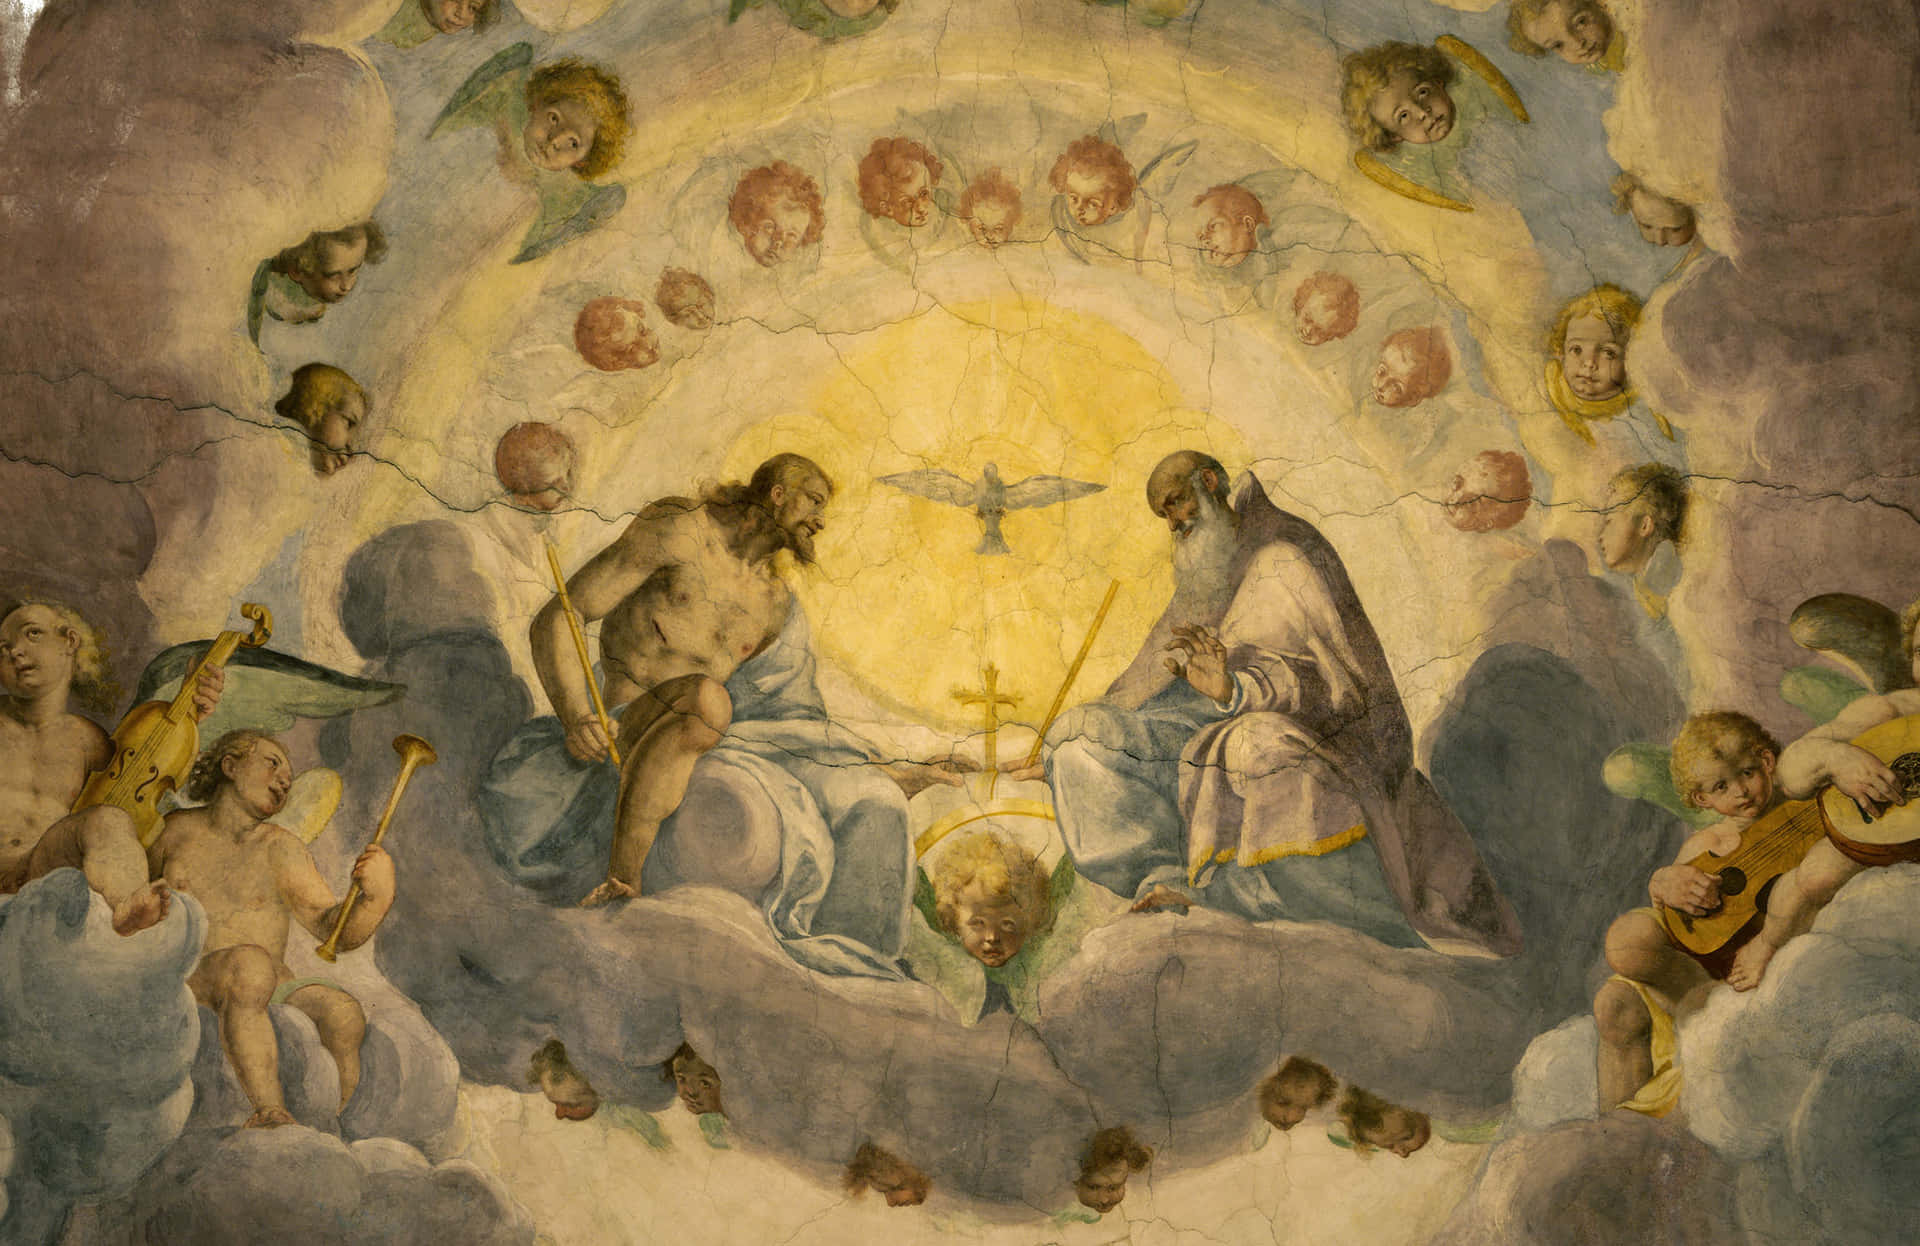 The Ceiling Fresco Jesus God Pictures